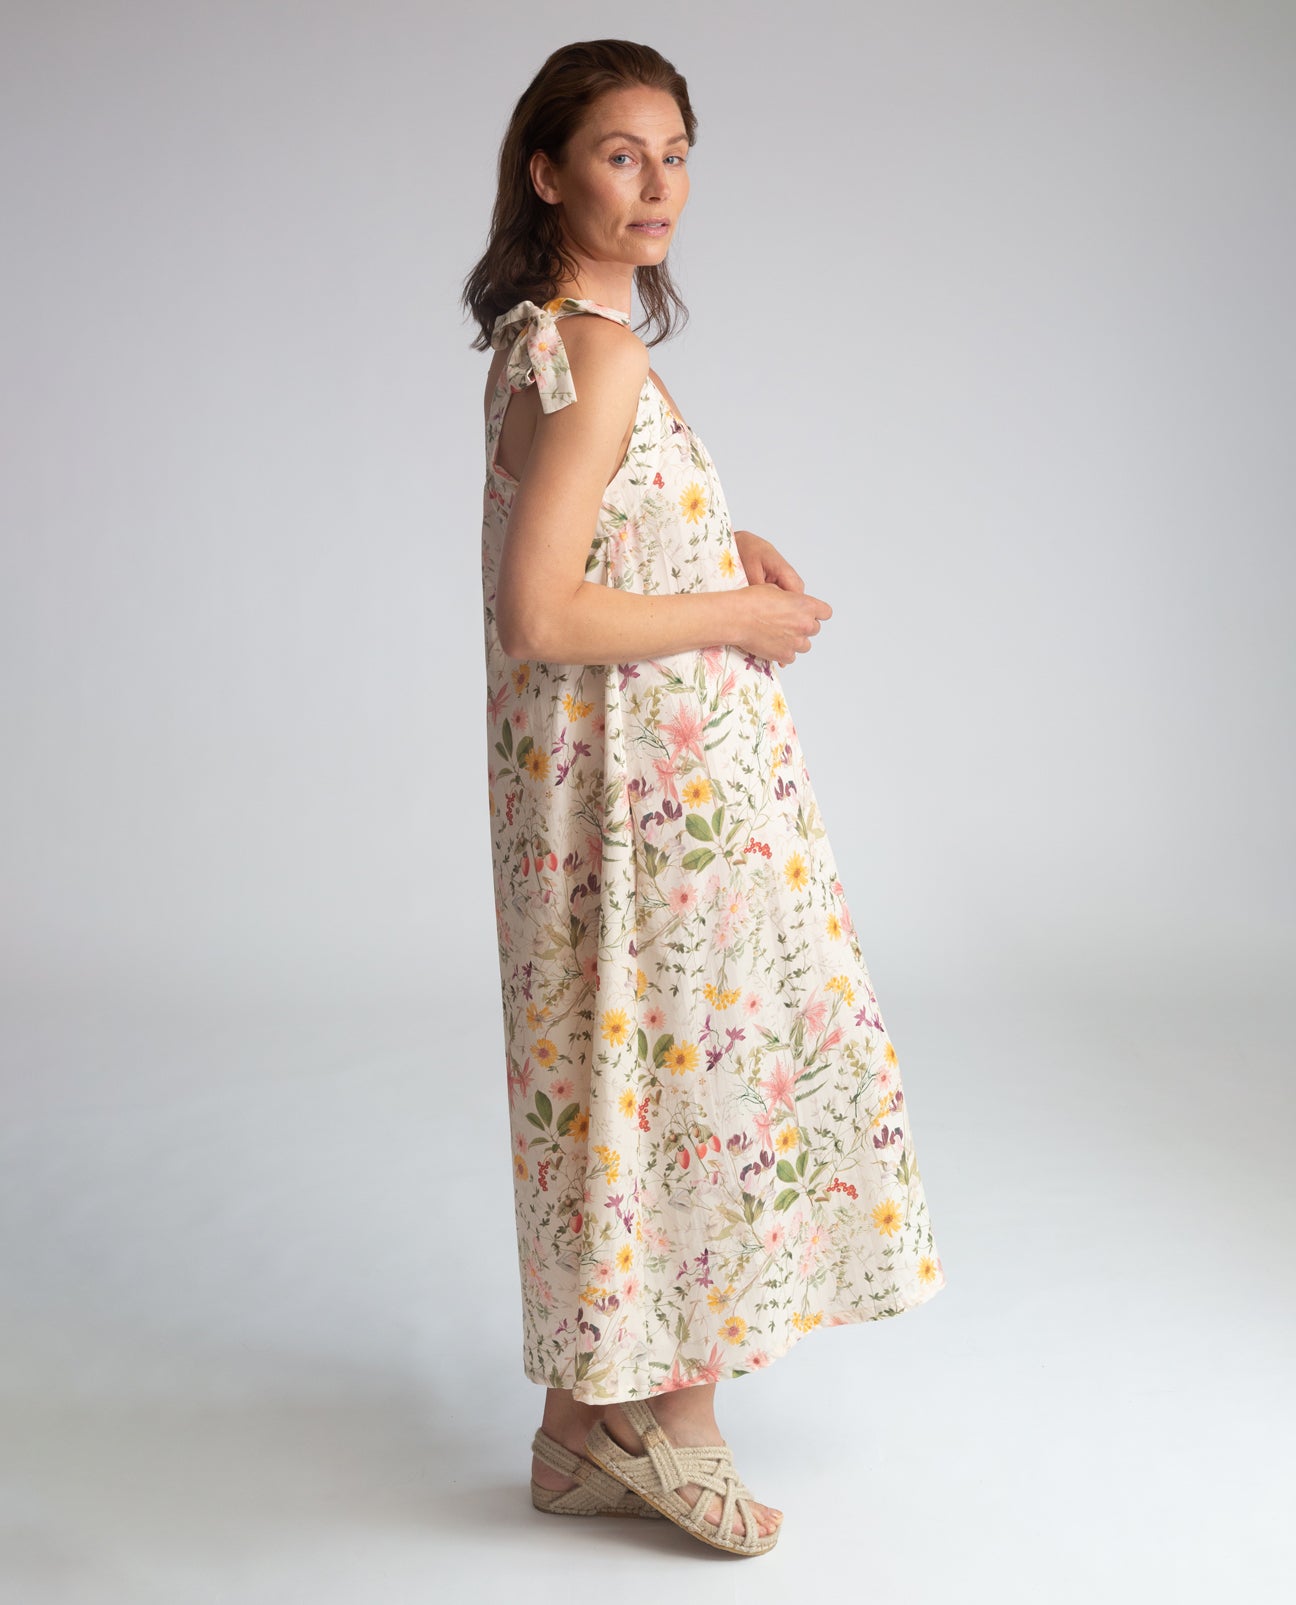 Coral-Paige Tencel Dress In Floral Print